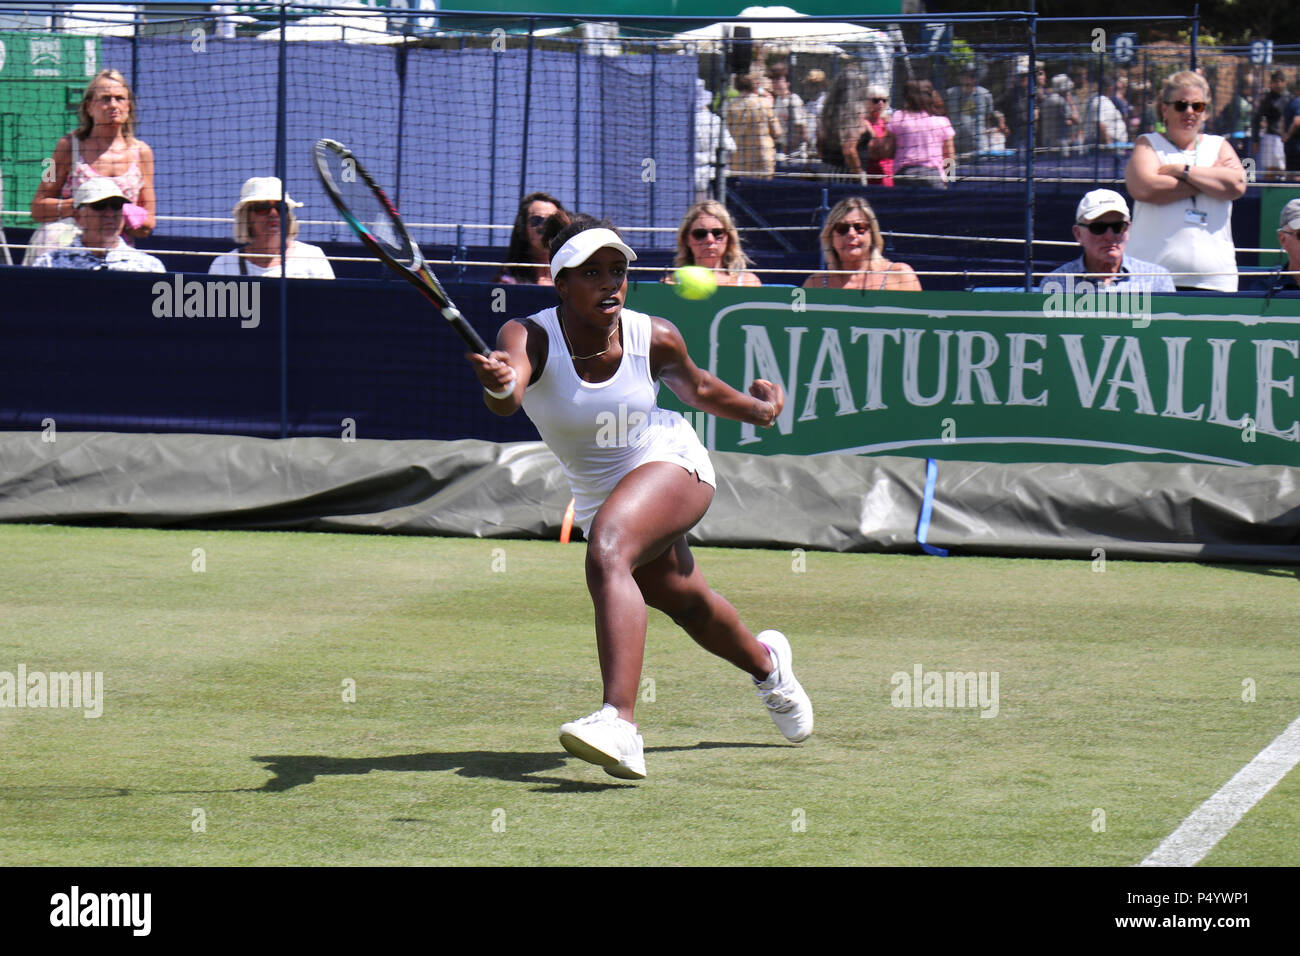 Sachia Vickery at the Women's Tennis Association WTA International Tennis in Eastbourne, Devonshire Park, East Sussex. Nature International Stock Photo - Alamy